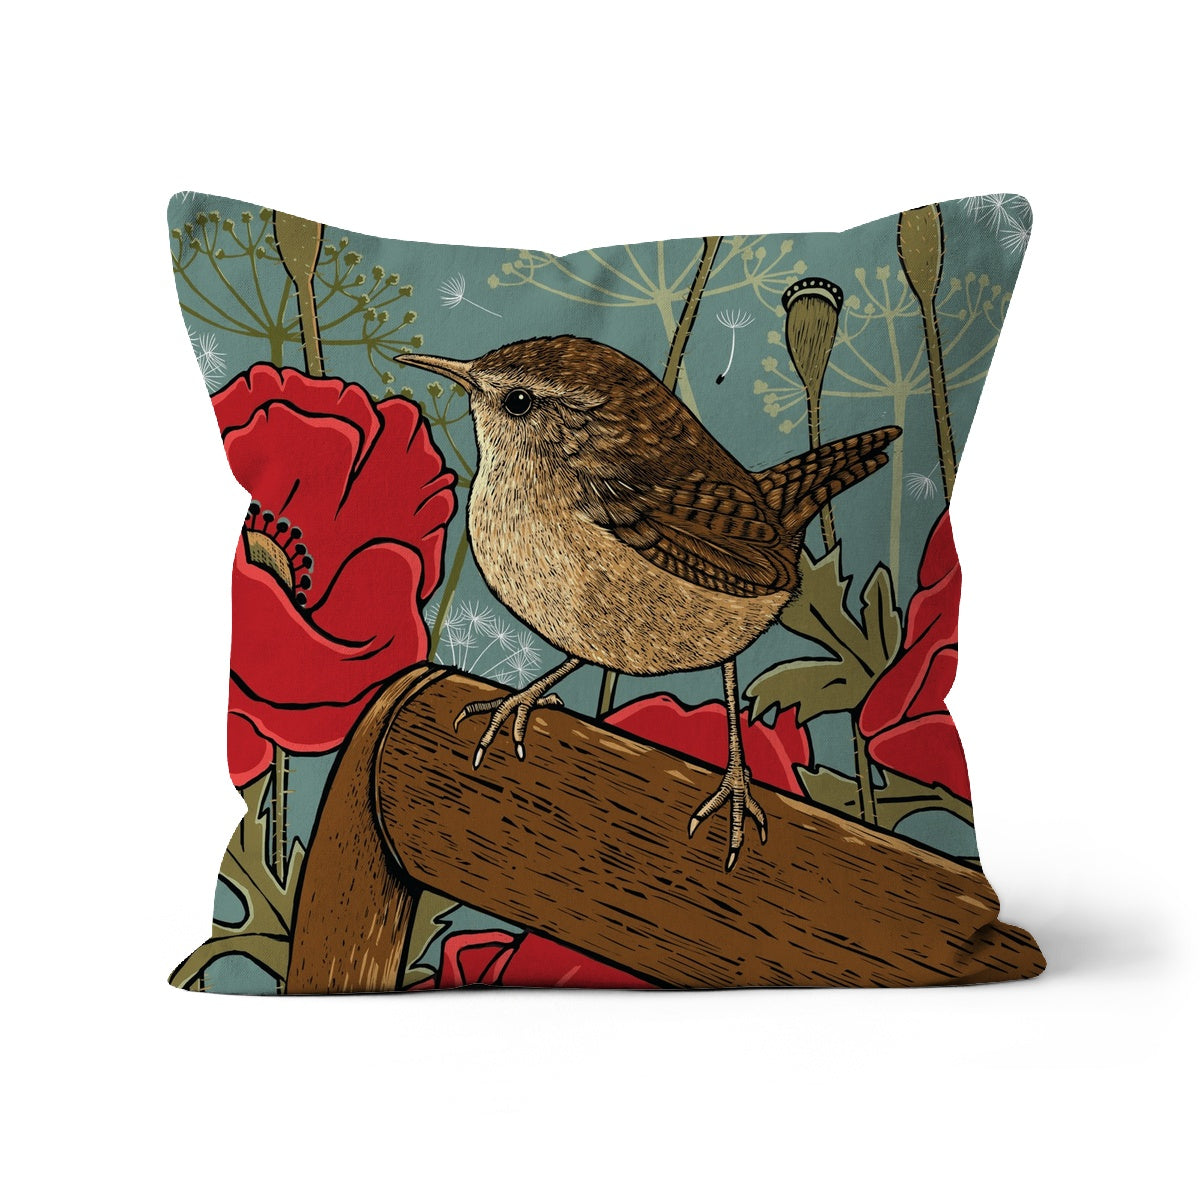 Poppies and Wren Cushion: Cute little wren perched on spade, poppies surround